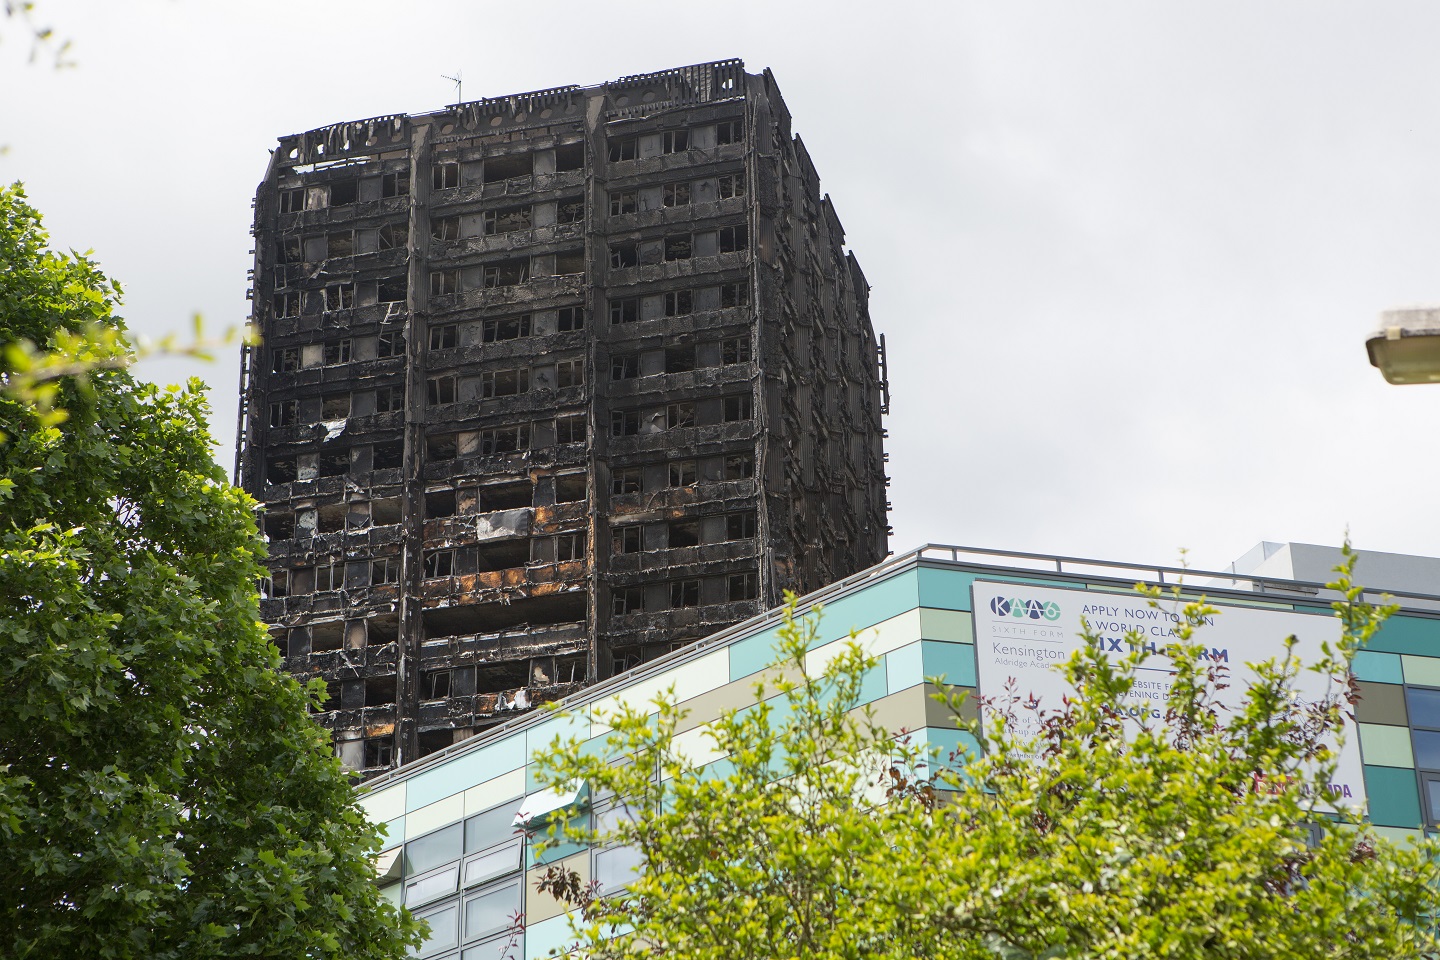 New Fire Safety Regulations to Implement Most of the Grenfell recommendations